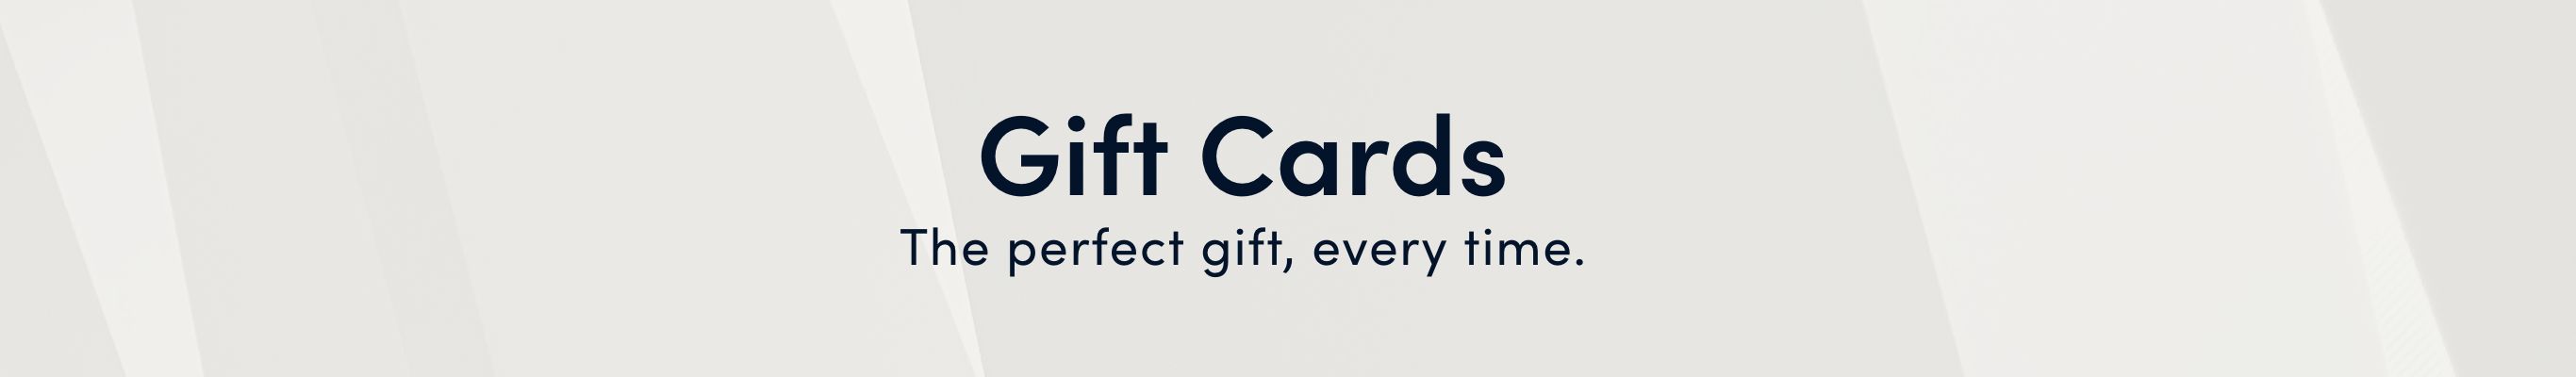 Gift Cards. The perfect gift, everytime.